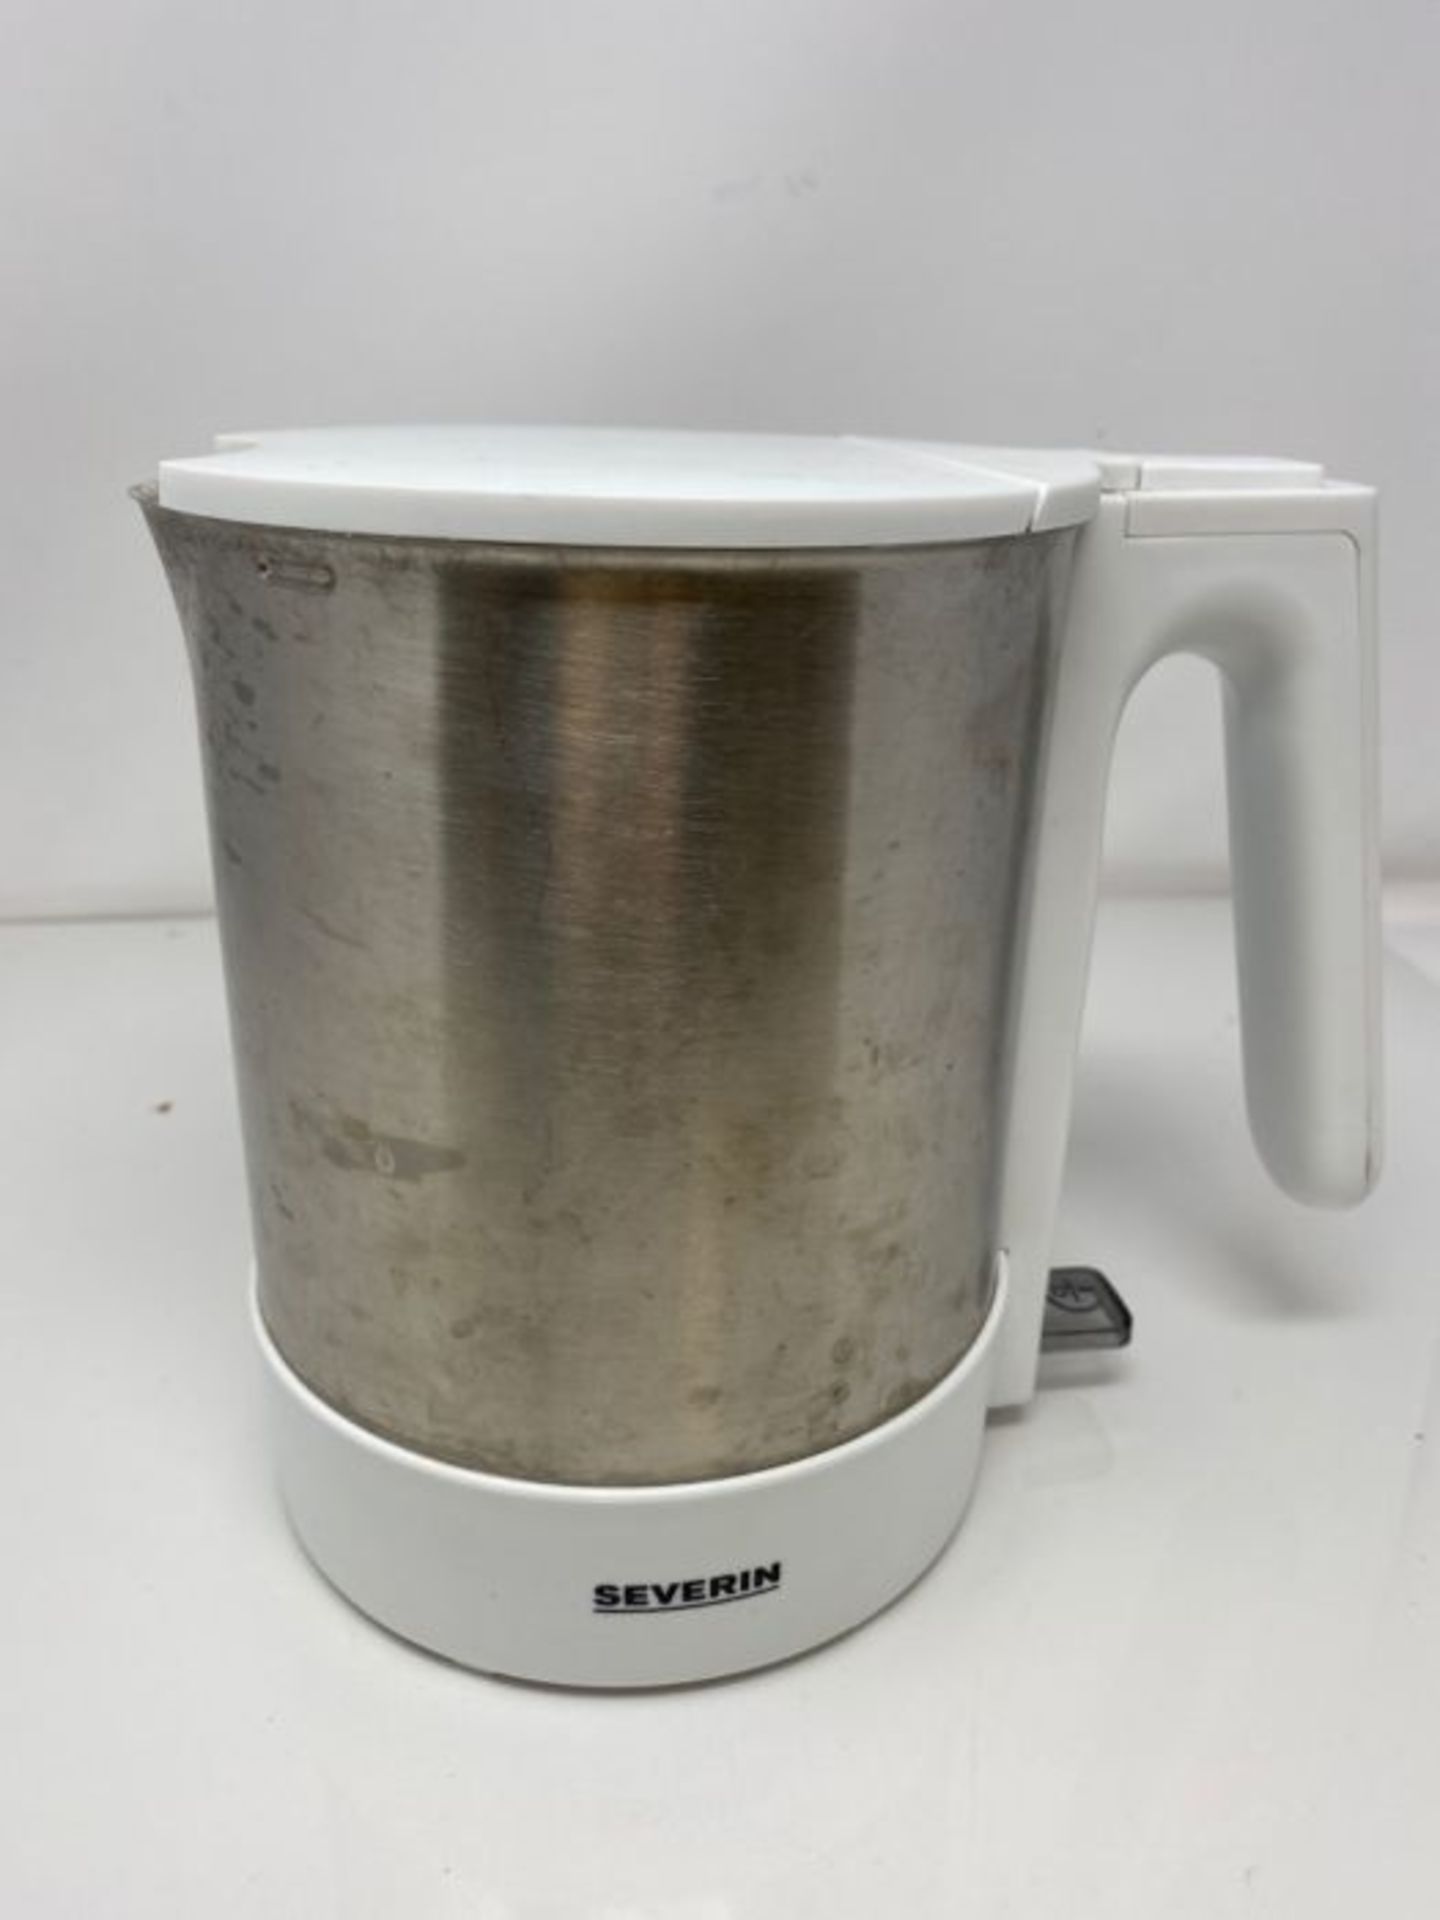 Severin WK 3419 electric kettle 1.7 L Stainless steel,White 2200 W WK 3419, 1.7 L, 220